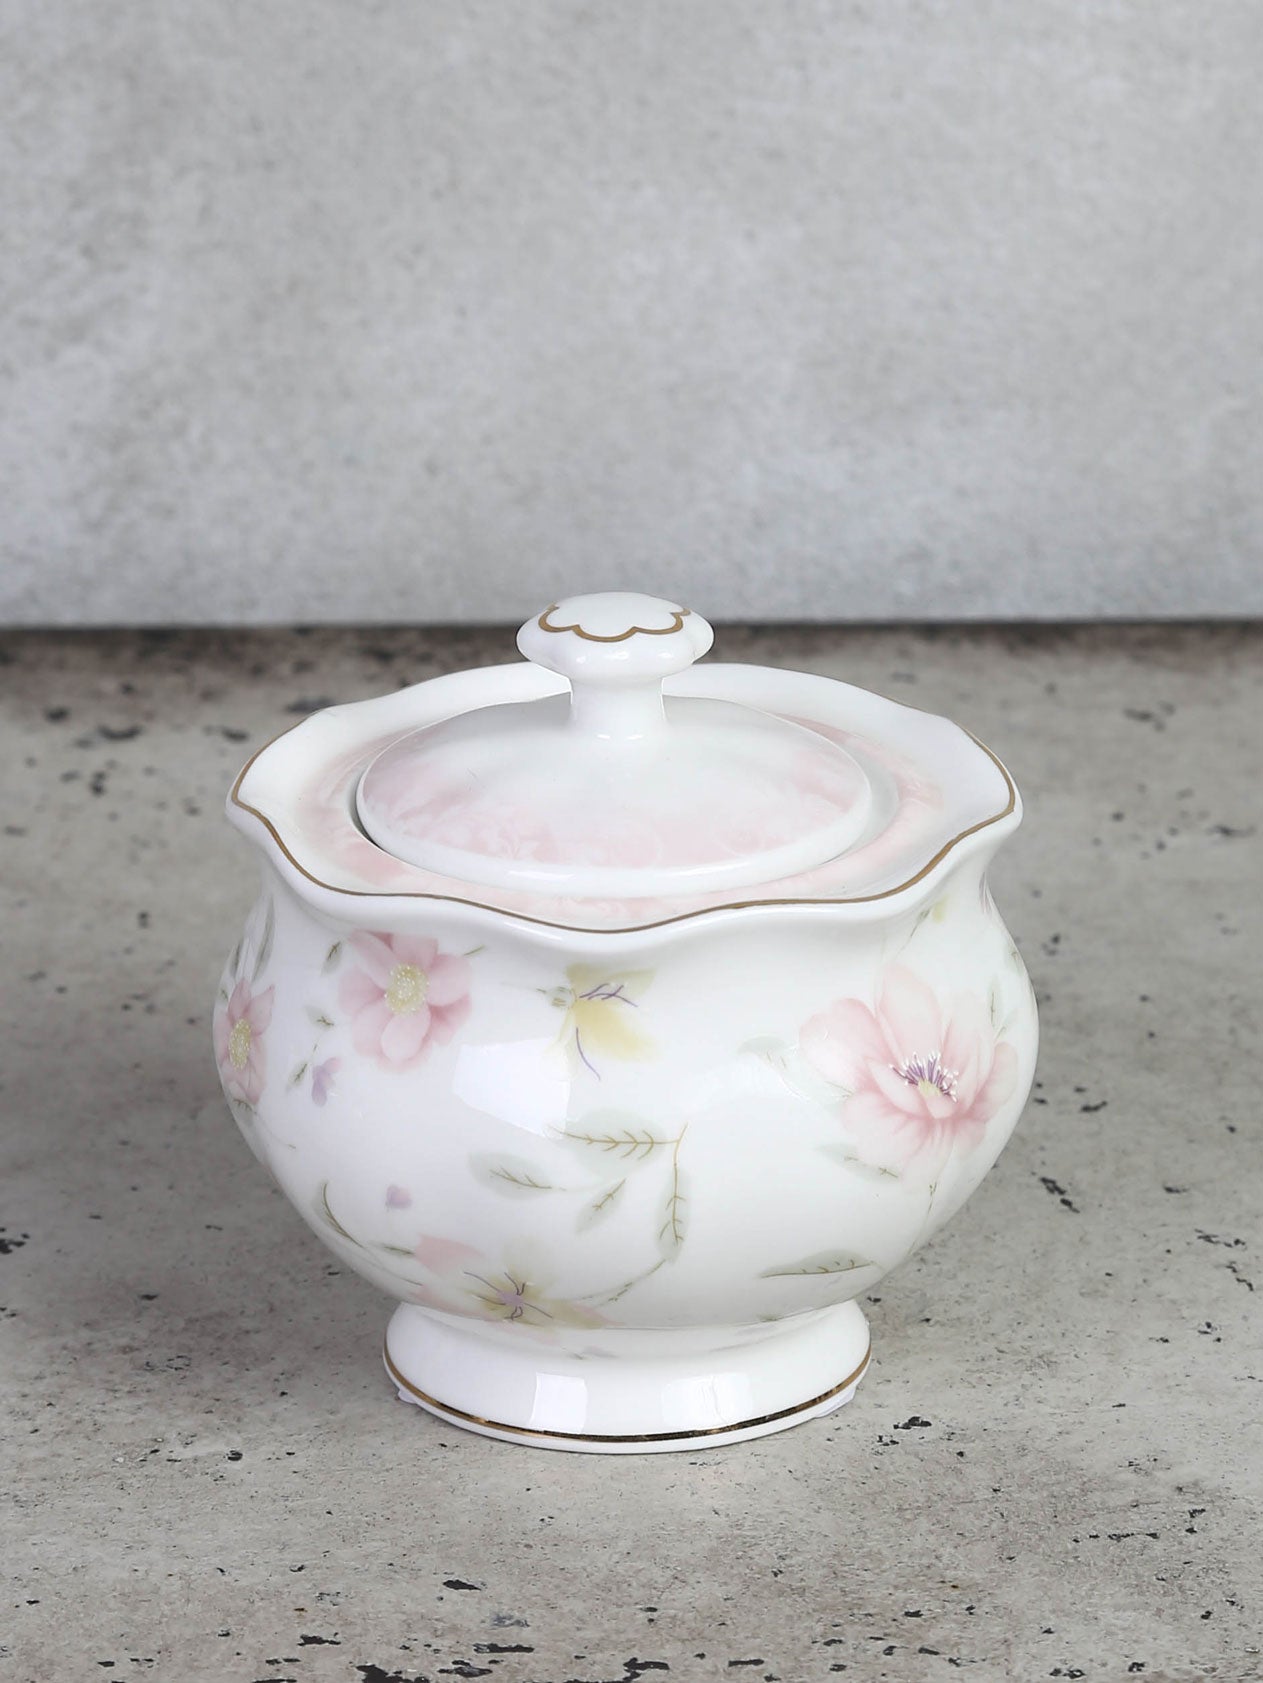 Sugar bowl with floral motif and gold edge